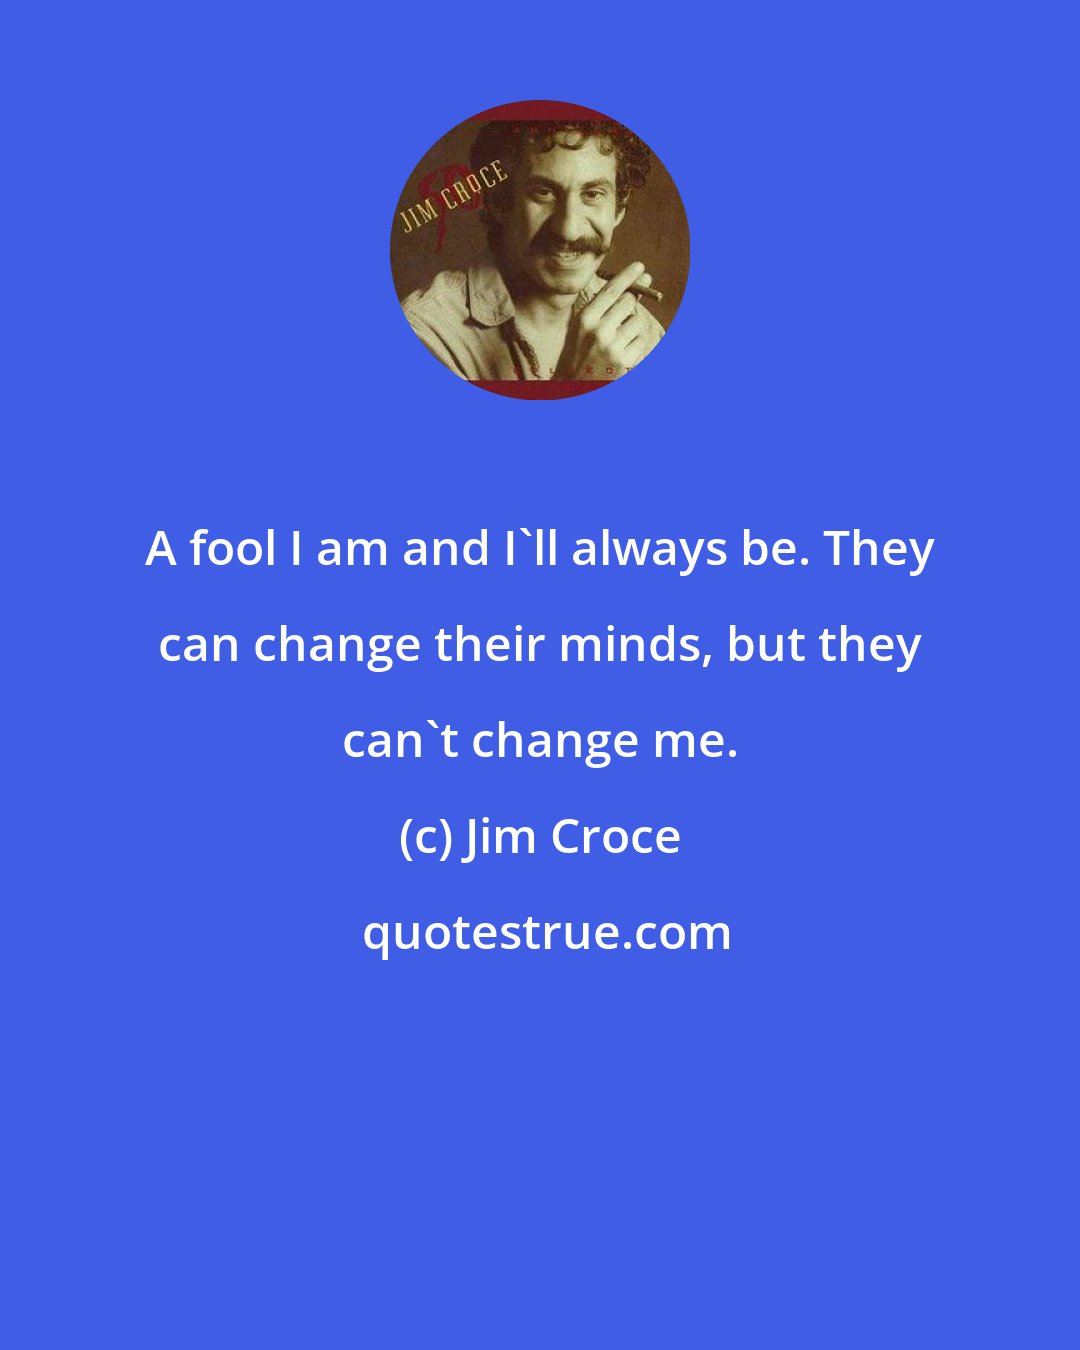 Jim Croce: A fool I am and I'll always be. They can change their minds, but they can't change me.